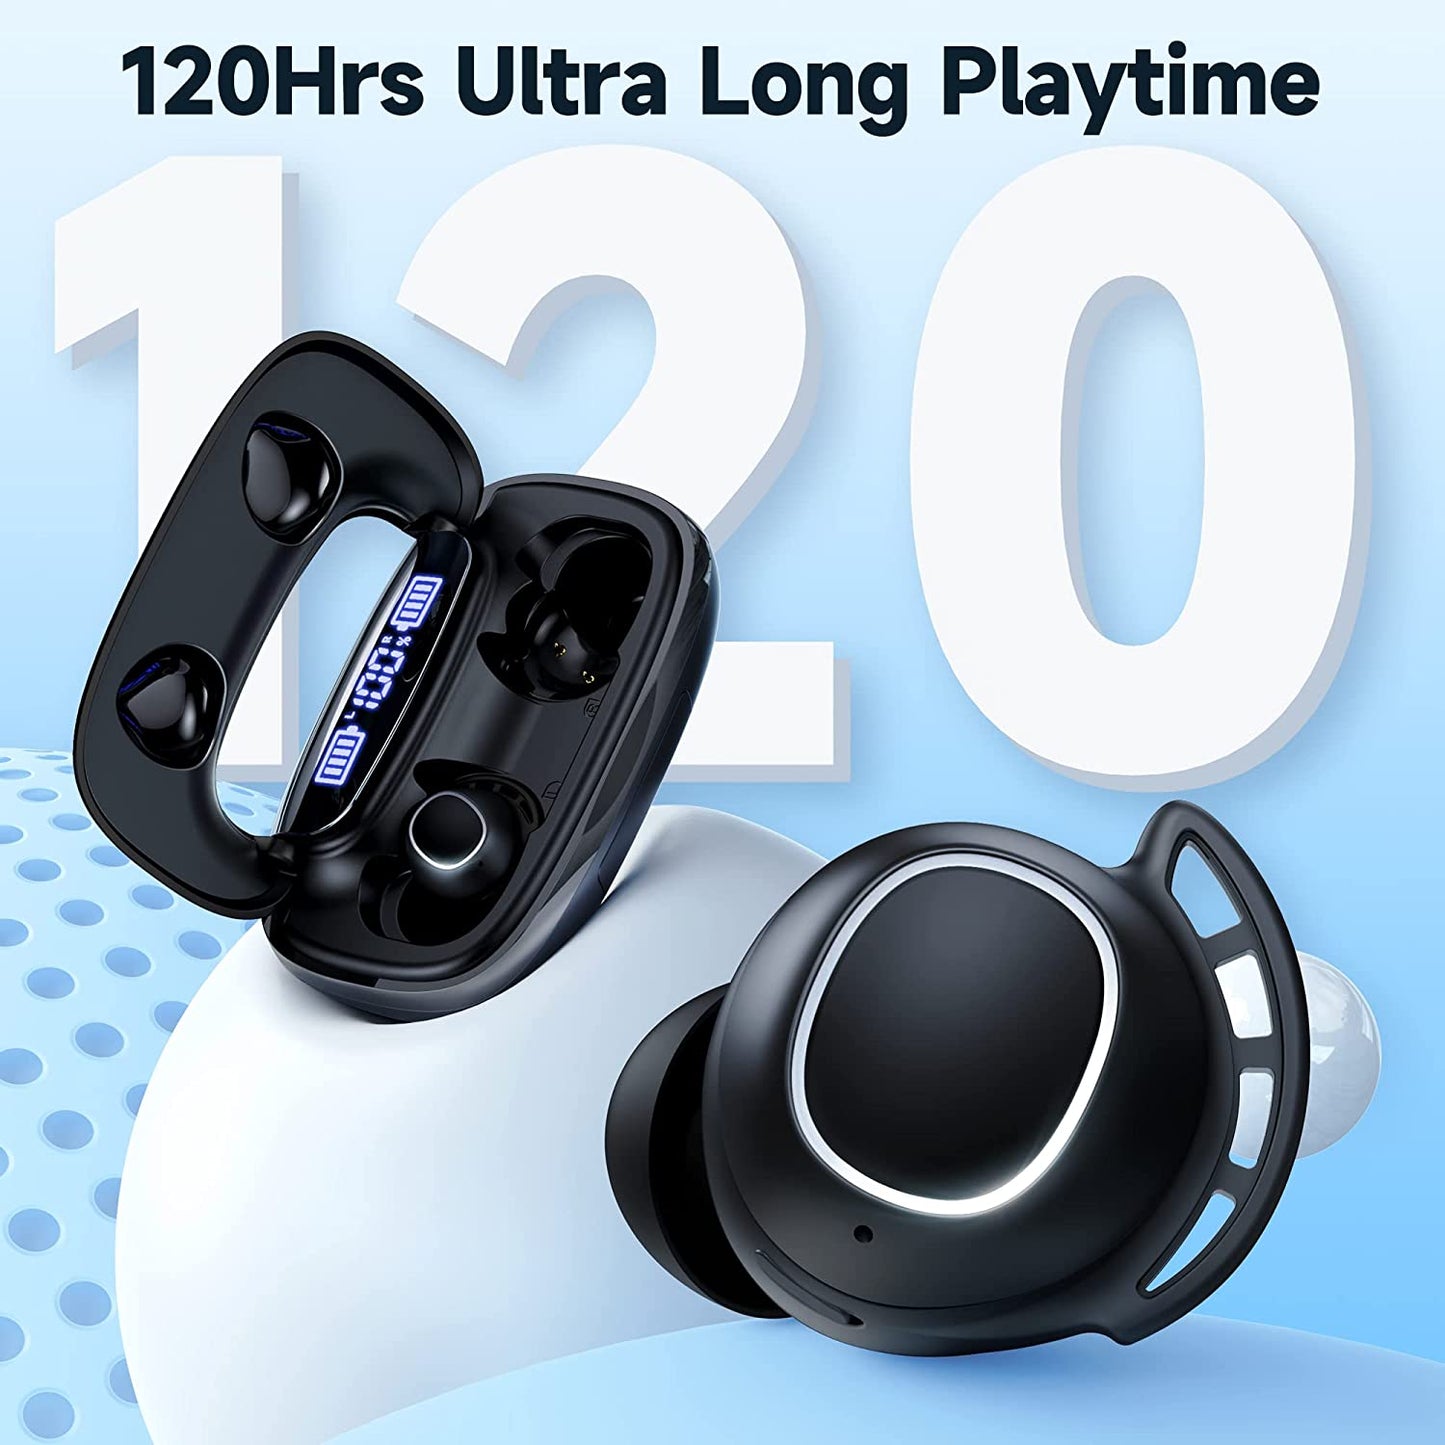 Bluetooth Headphones Wireless Earbuds 120H Playtime Ear Buds IPX7 Waterproof Earphones Digital Power Display Headsets with Charging Case and Mic for Sports Fitness Laptop TV Computer Cell Phone Games